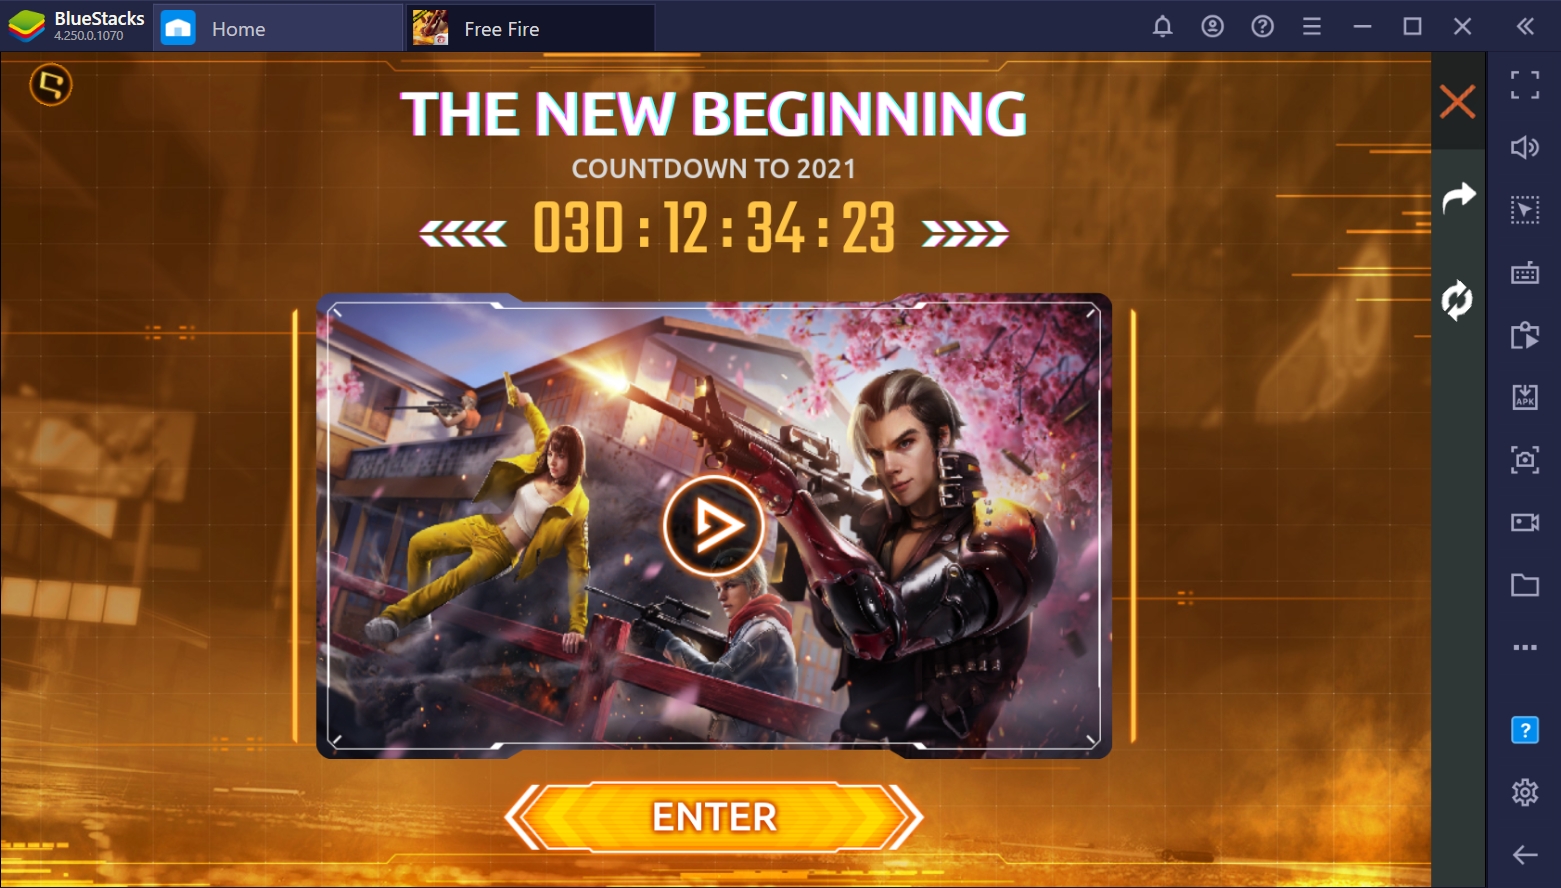 Free Fire - All You Need to Know About ‘The New Beginning’ Event